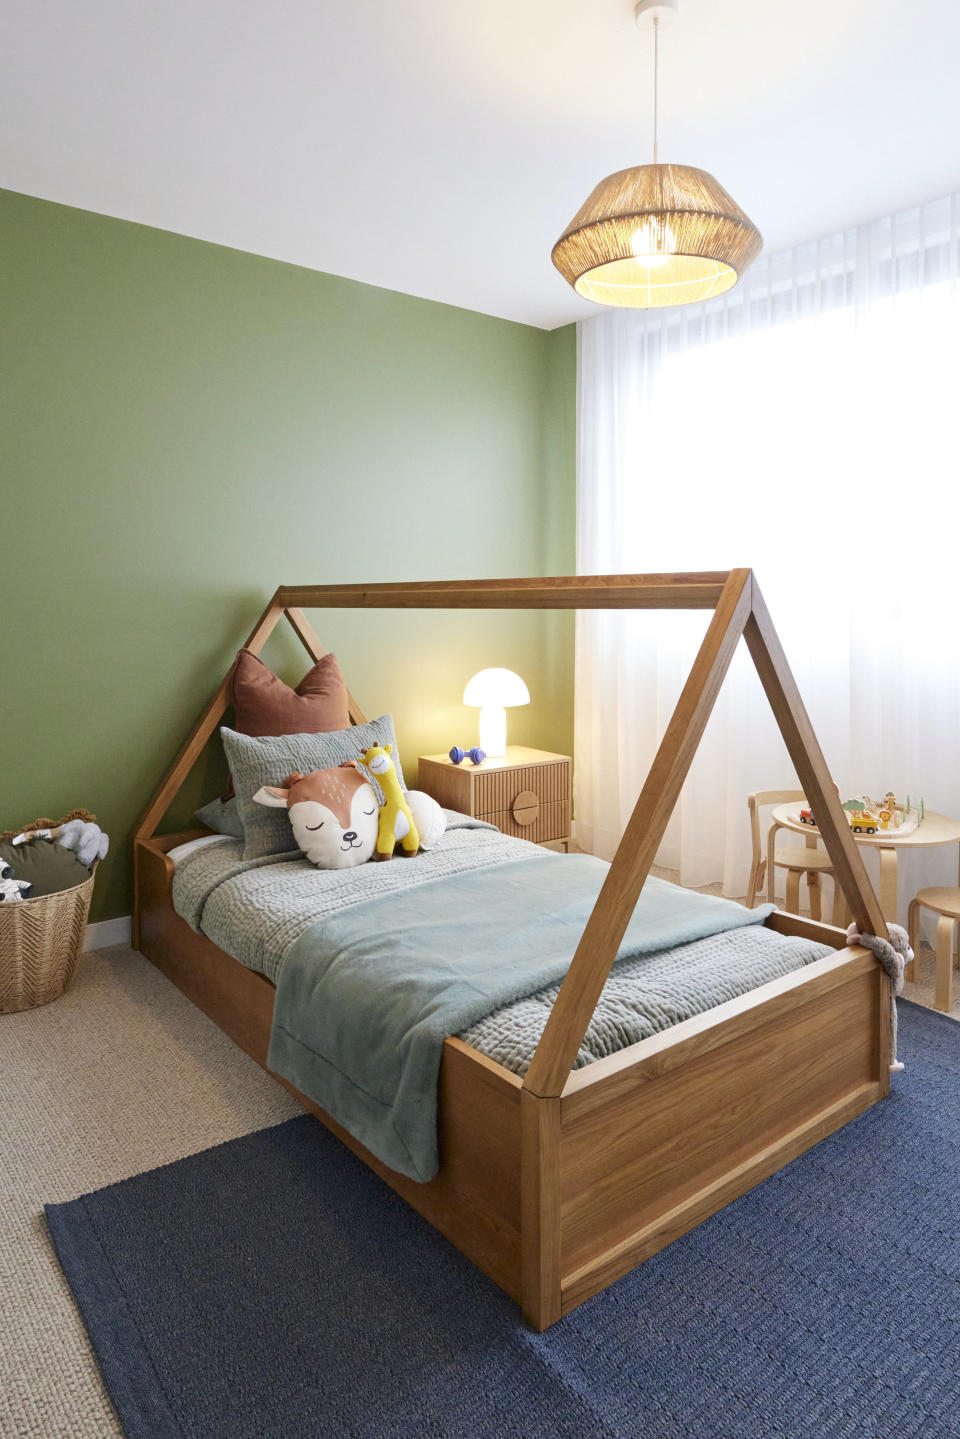 A shot of a single bed with a posters in a triangular shape above it, in front of a green wall and on a blue rug. 